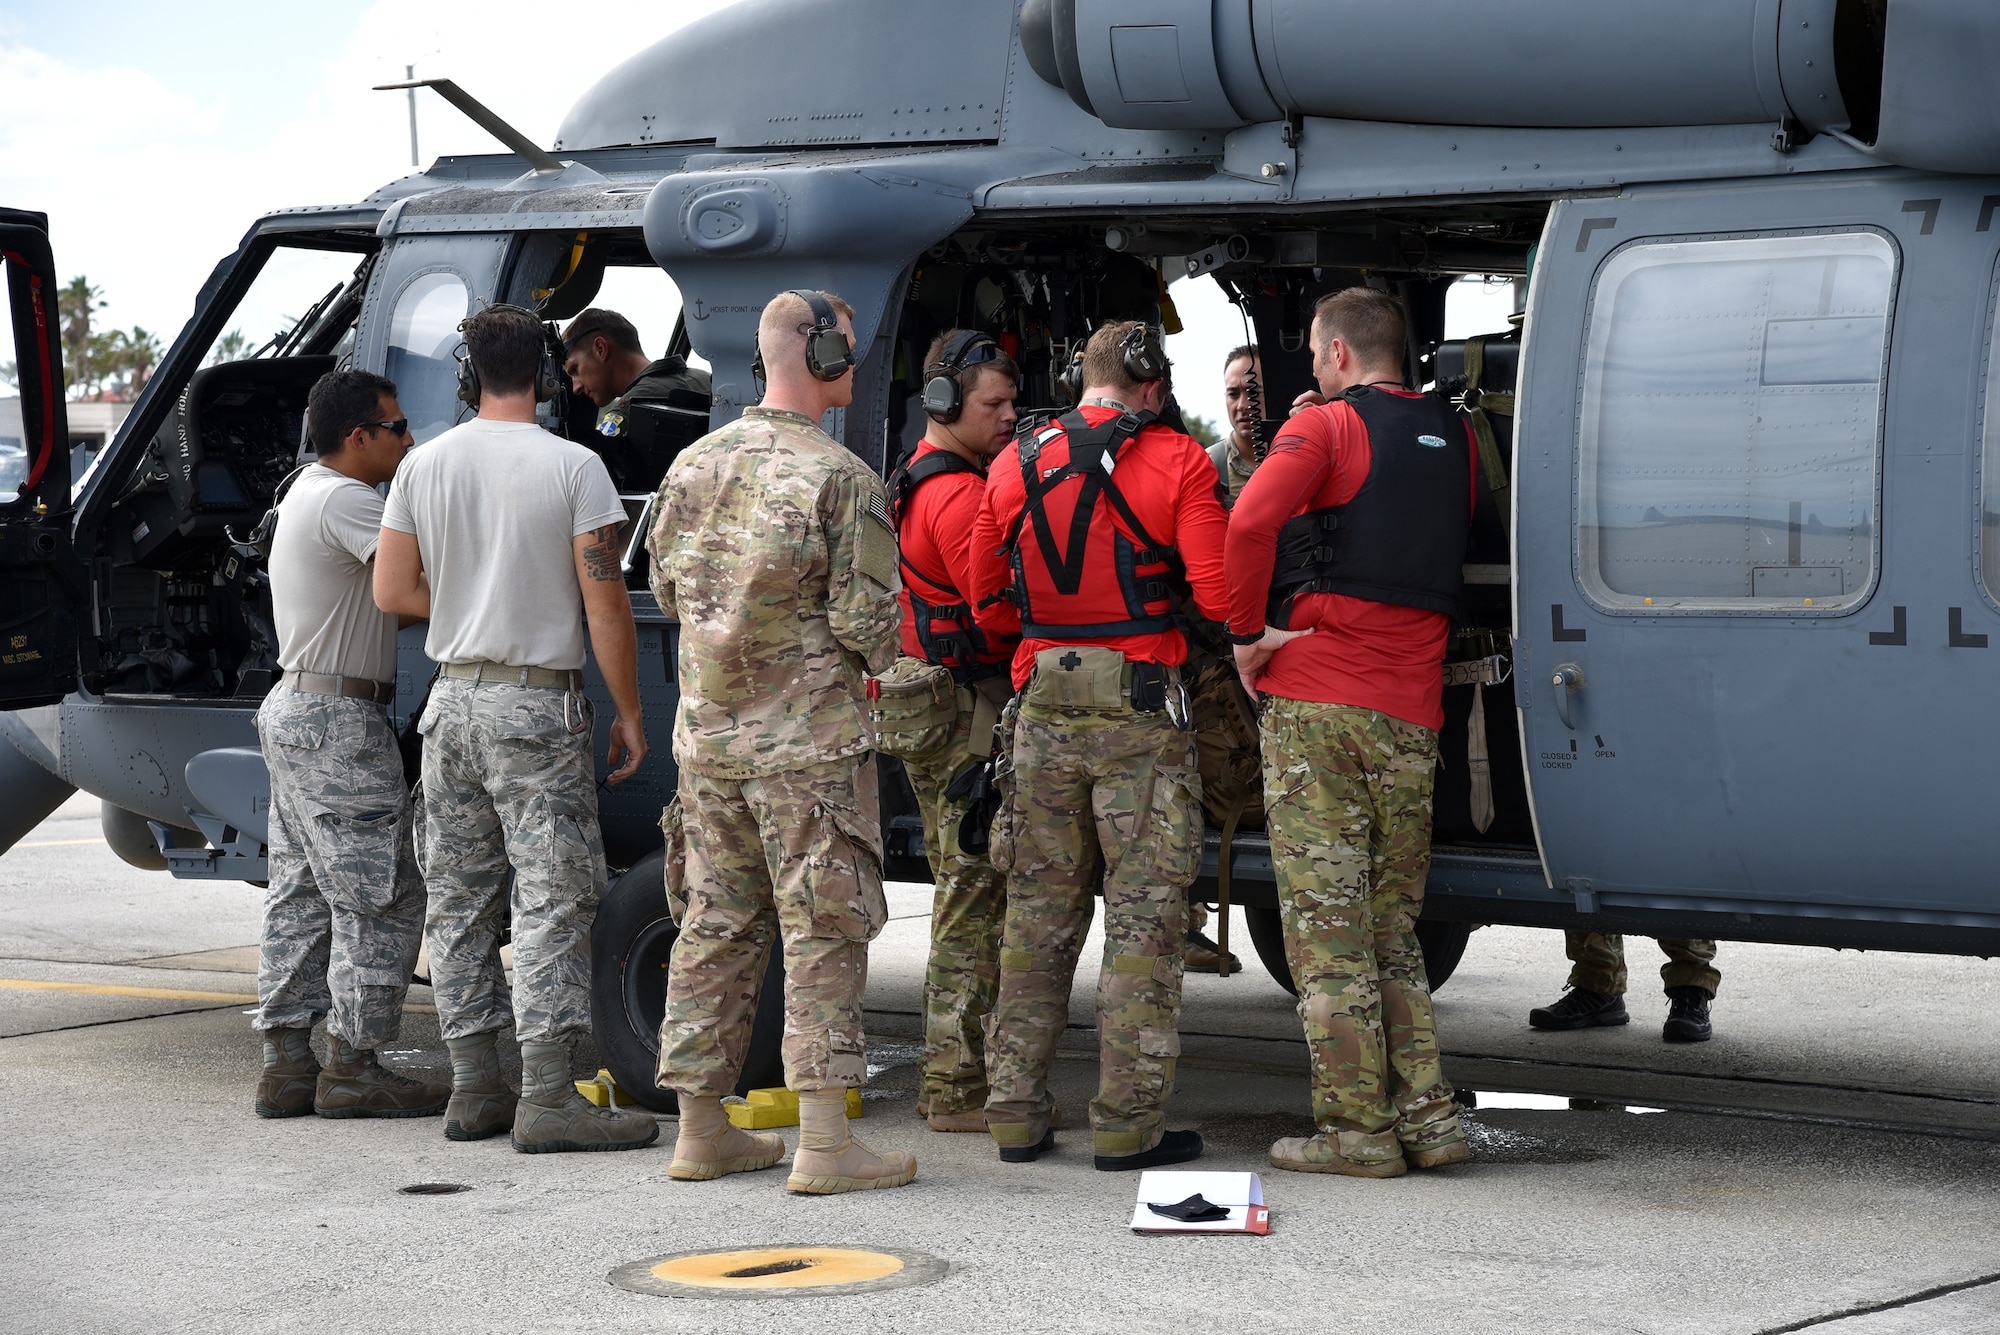 Rescue Airmen conduct a medical evacuation of cruise passenger at sea